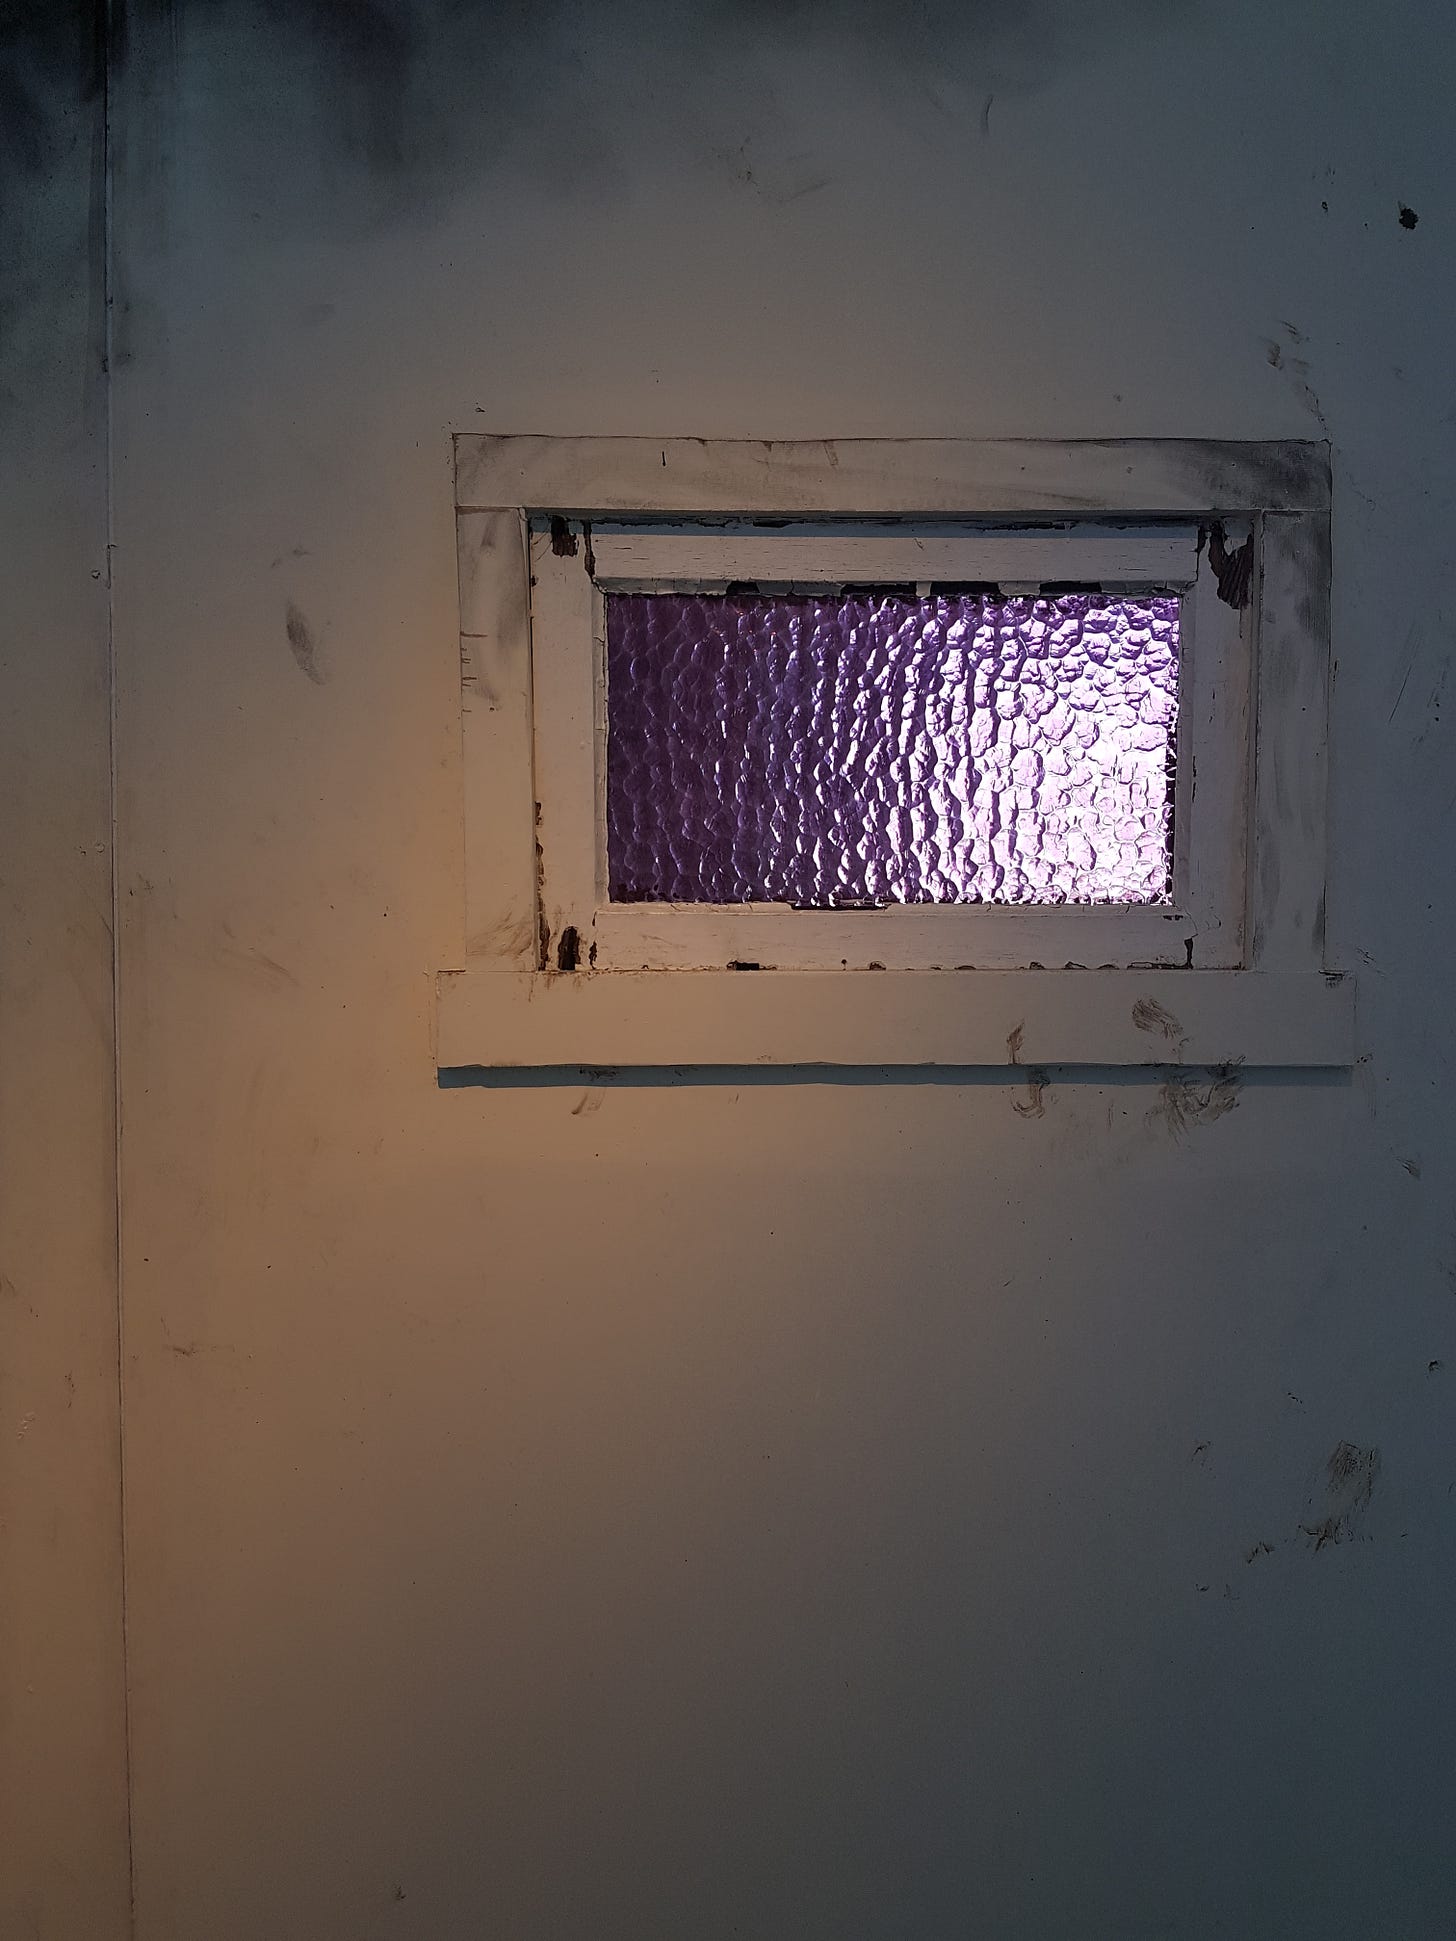 A small purple stained-glass window set within a dirty wall